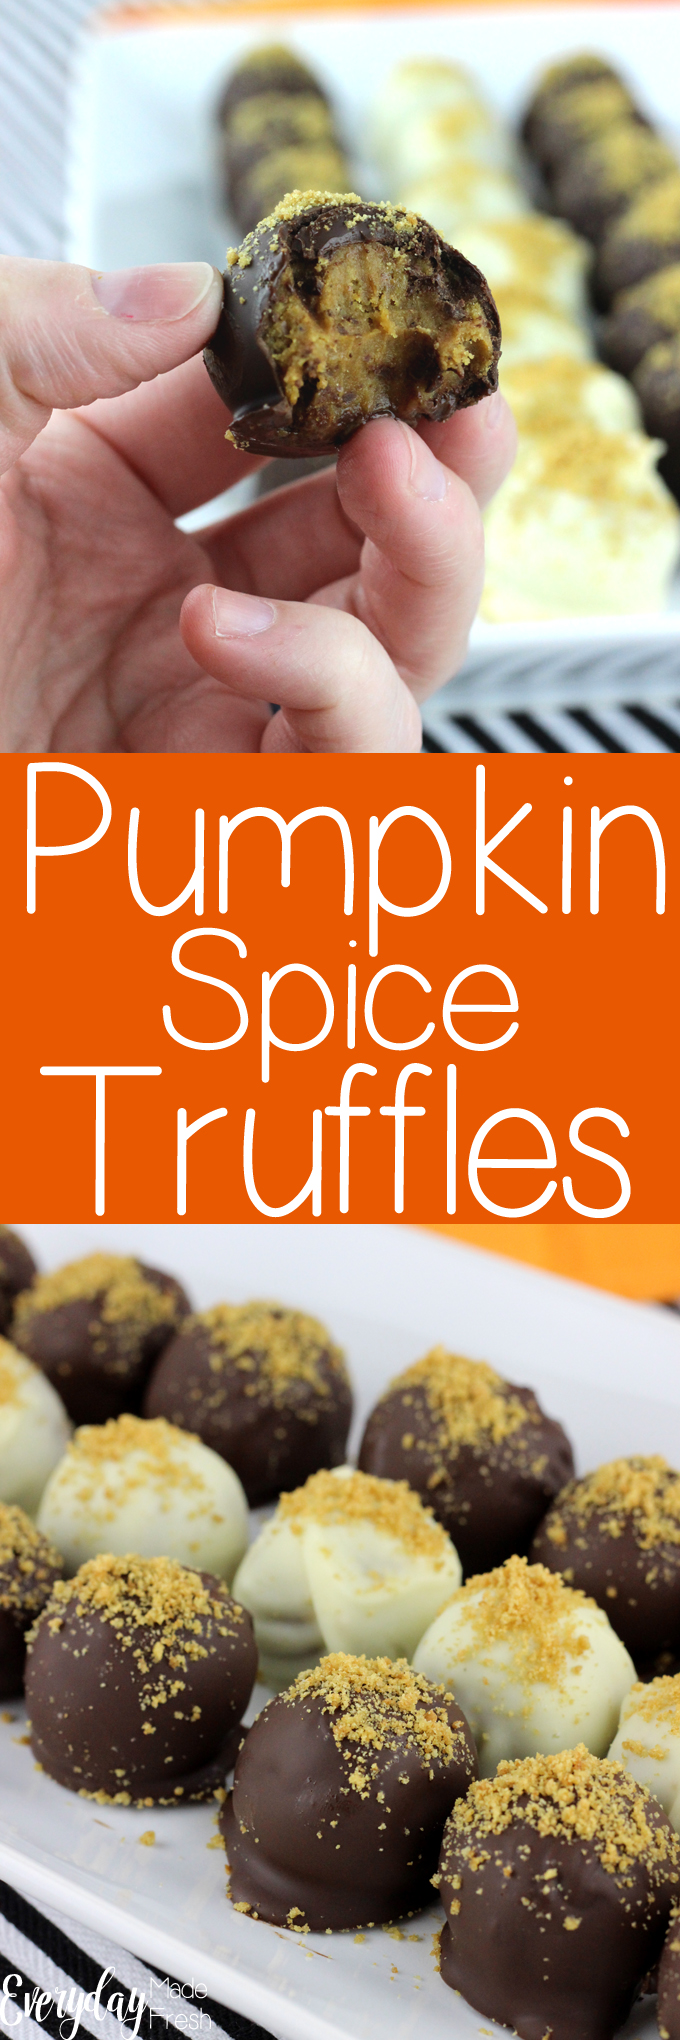 These Pumpkin Spice Truffles have creamy sweet centers enveloped inside of a dark chocolate and white chocolate candy coated shell. You won't believe how easy these are to make! | EverydayMadeFresh.com